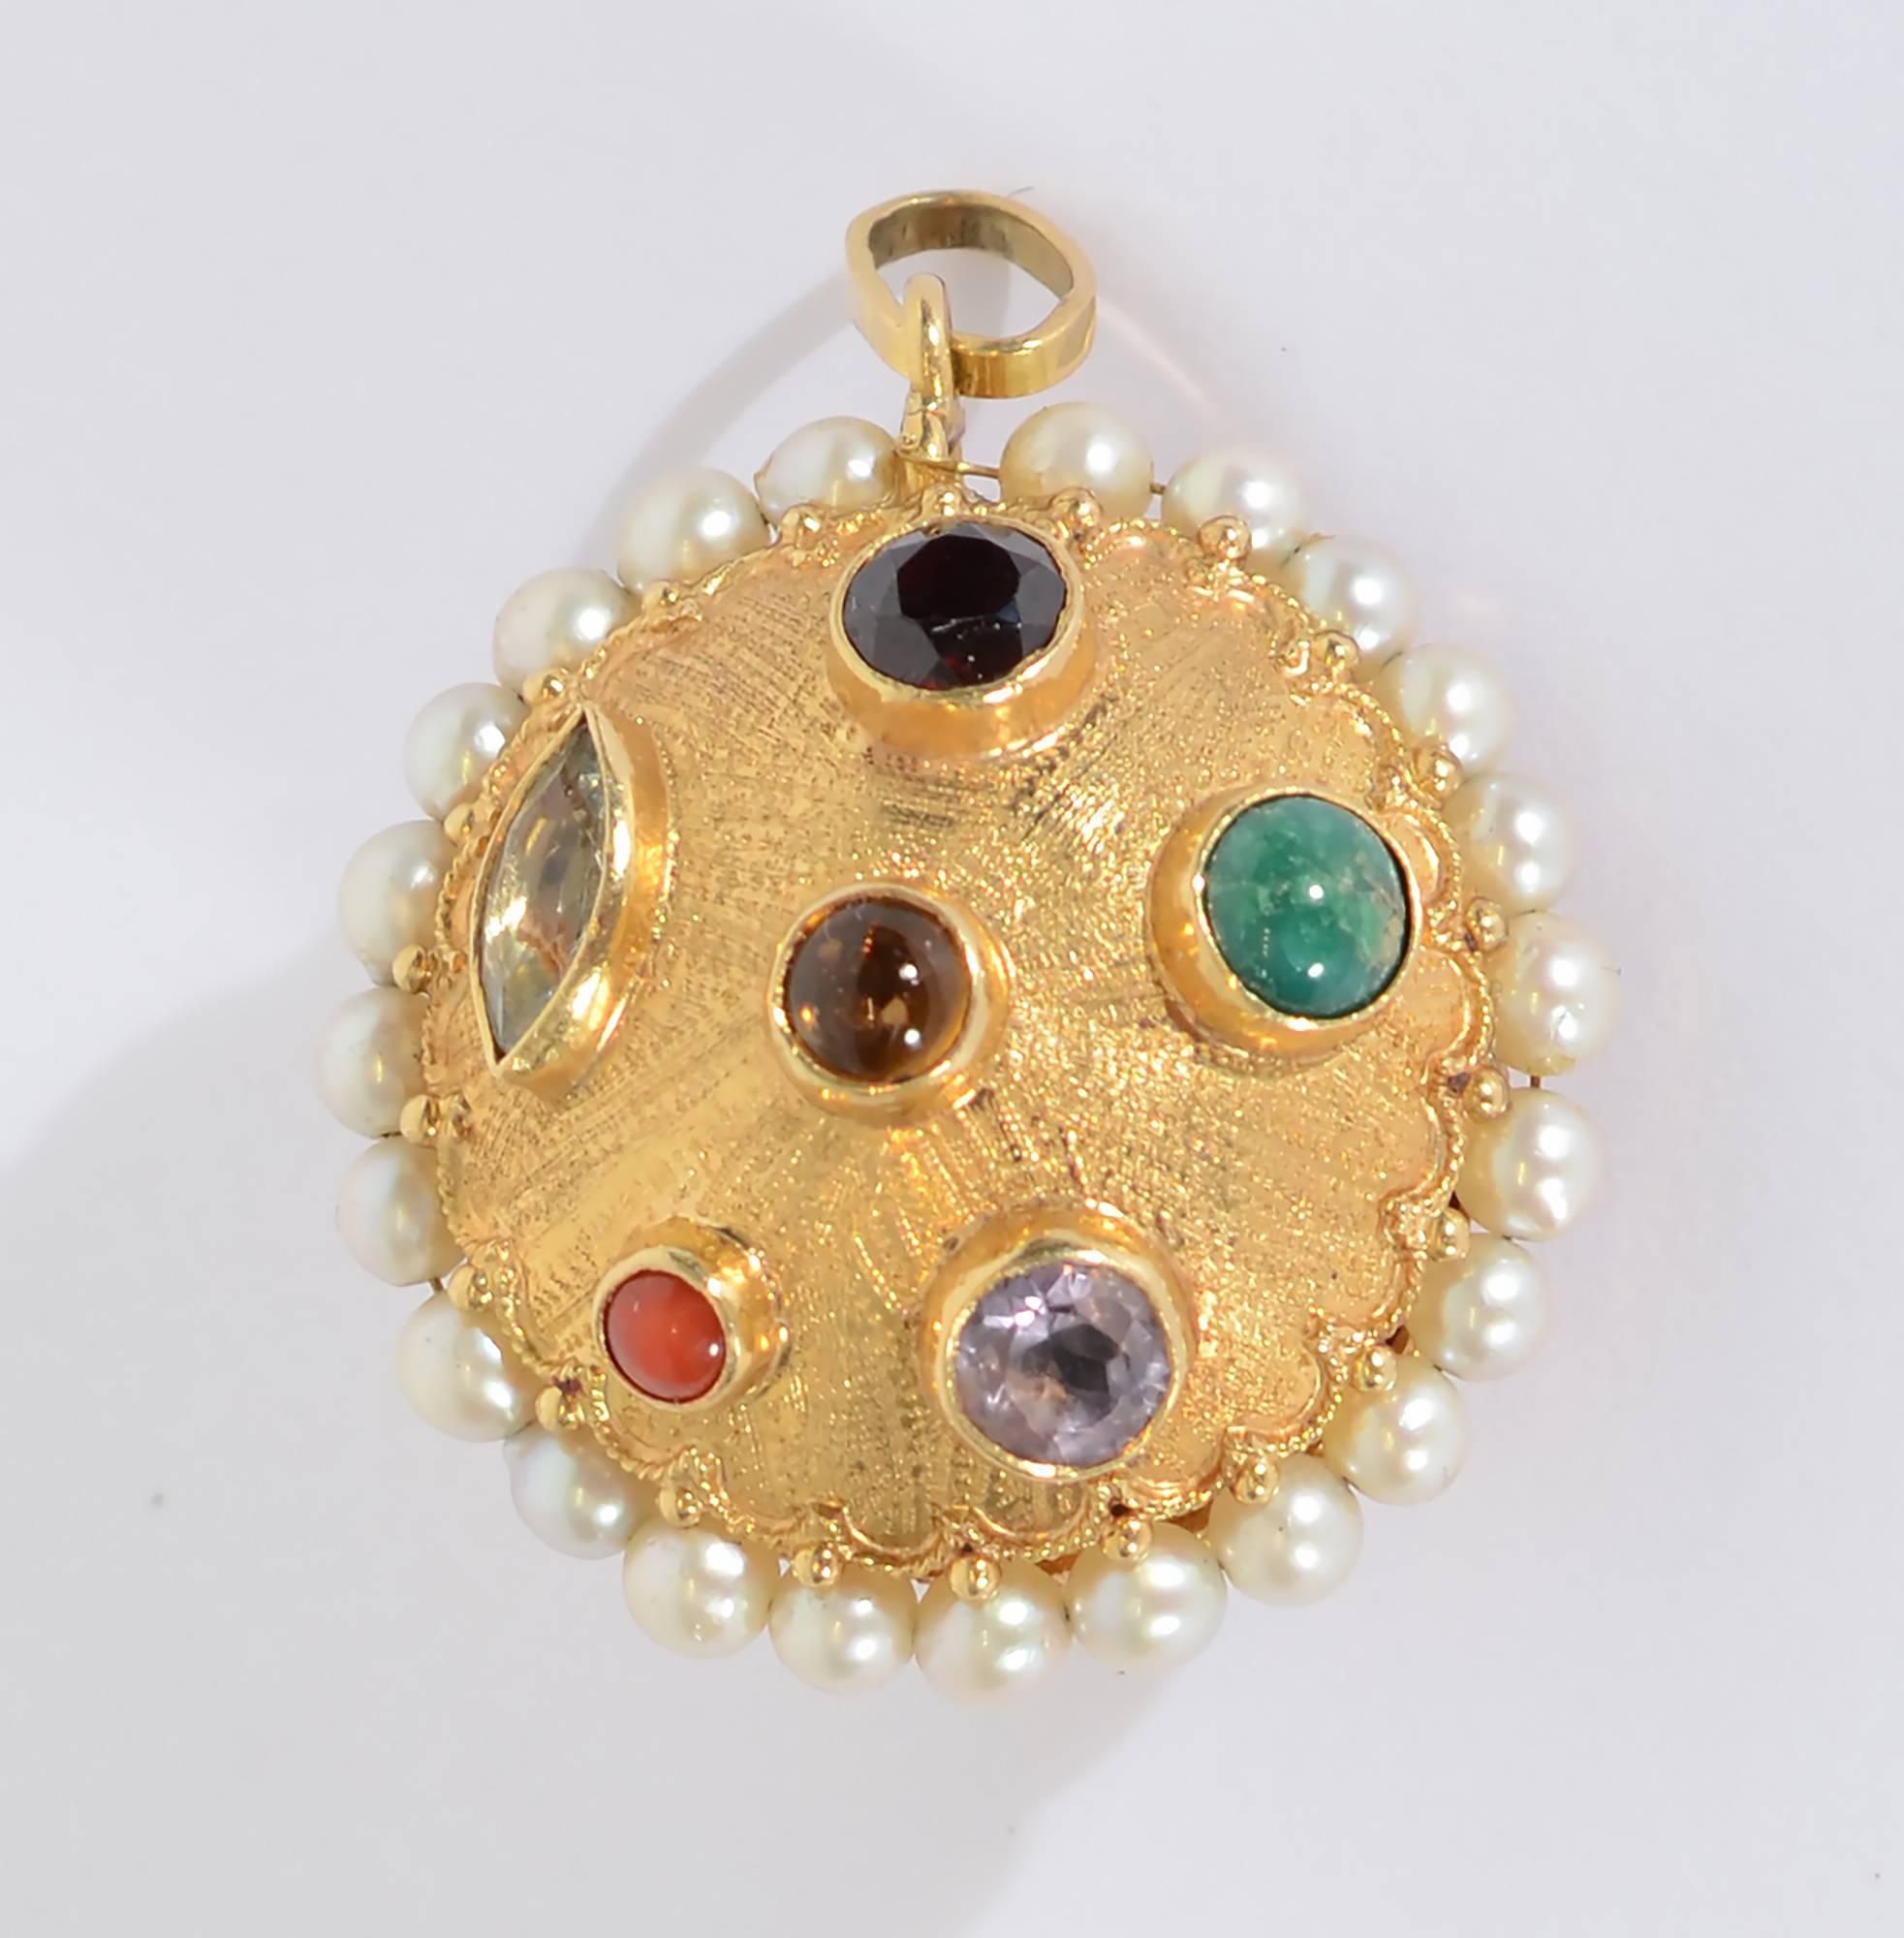 Beautifully made reversible 18 karat  gold domed disc with a variety of semiprecious stones. They include: amethyst; citrine; garnet; coral and turquoise. Stones are both faceted and cabochon. The entire disc is surrounded with a gold swag and a